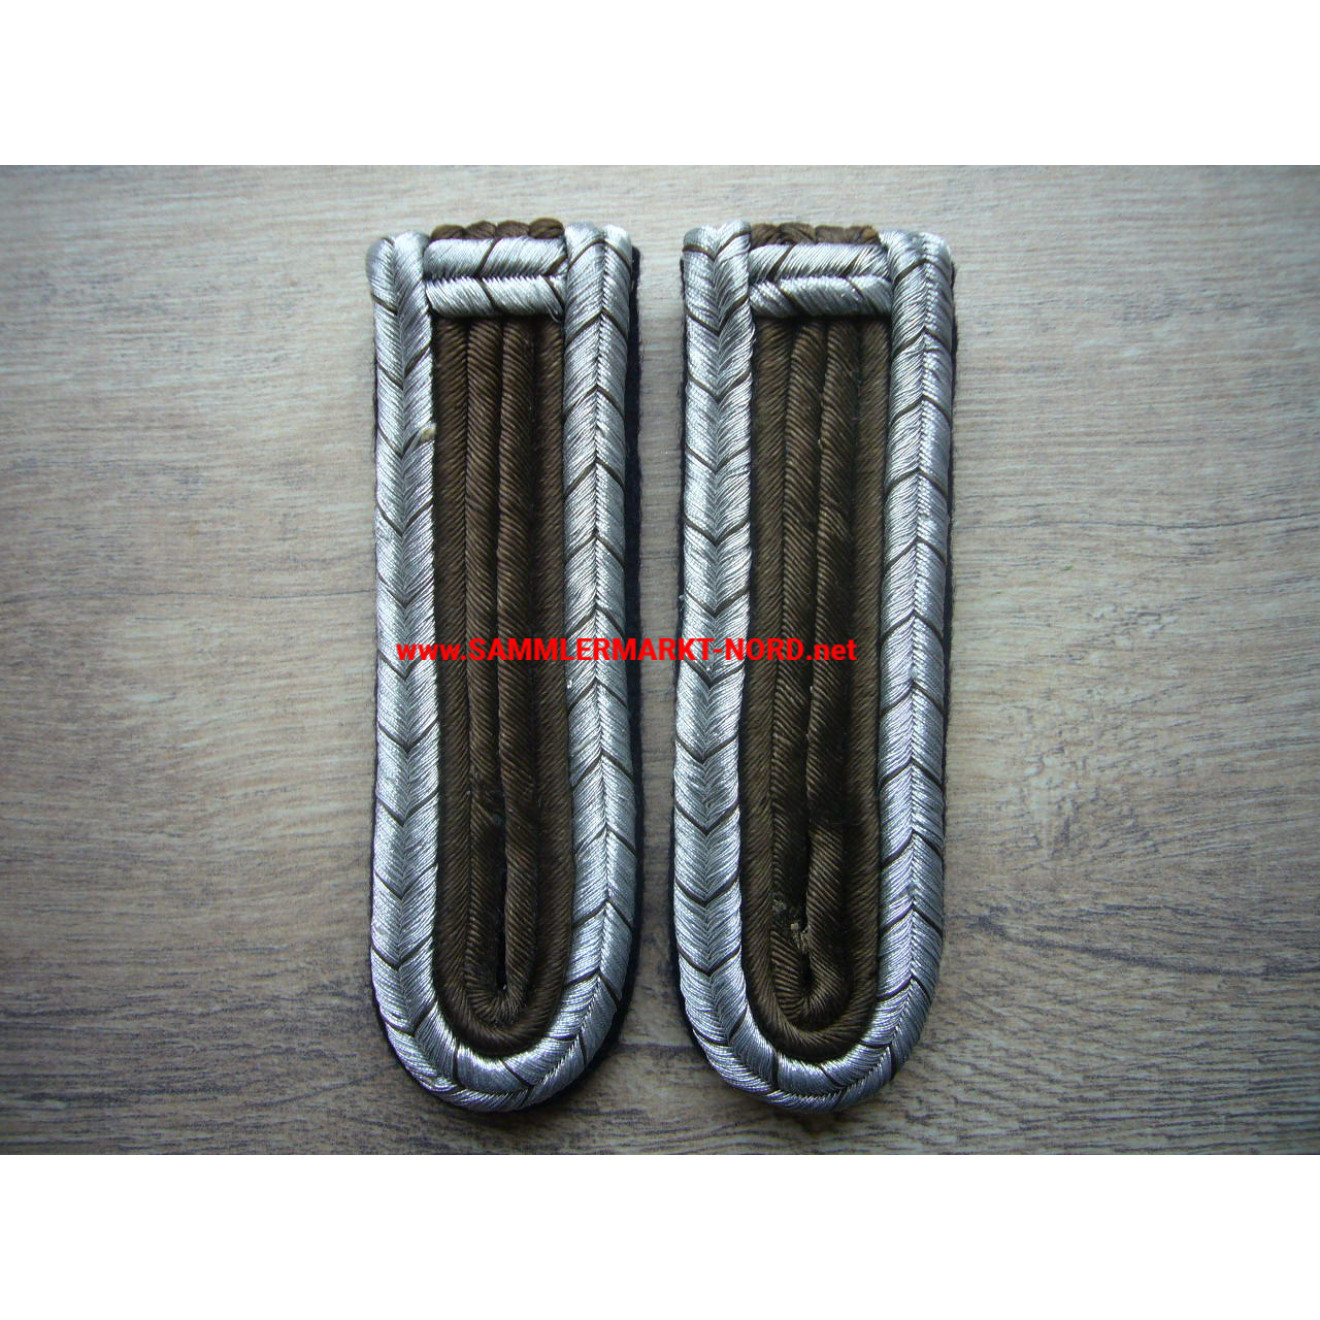 Police veterinary service - pair of shoulder boards Oberwachtmeister